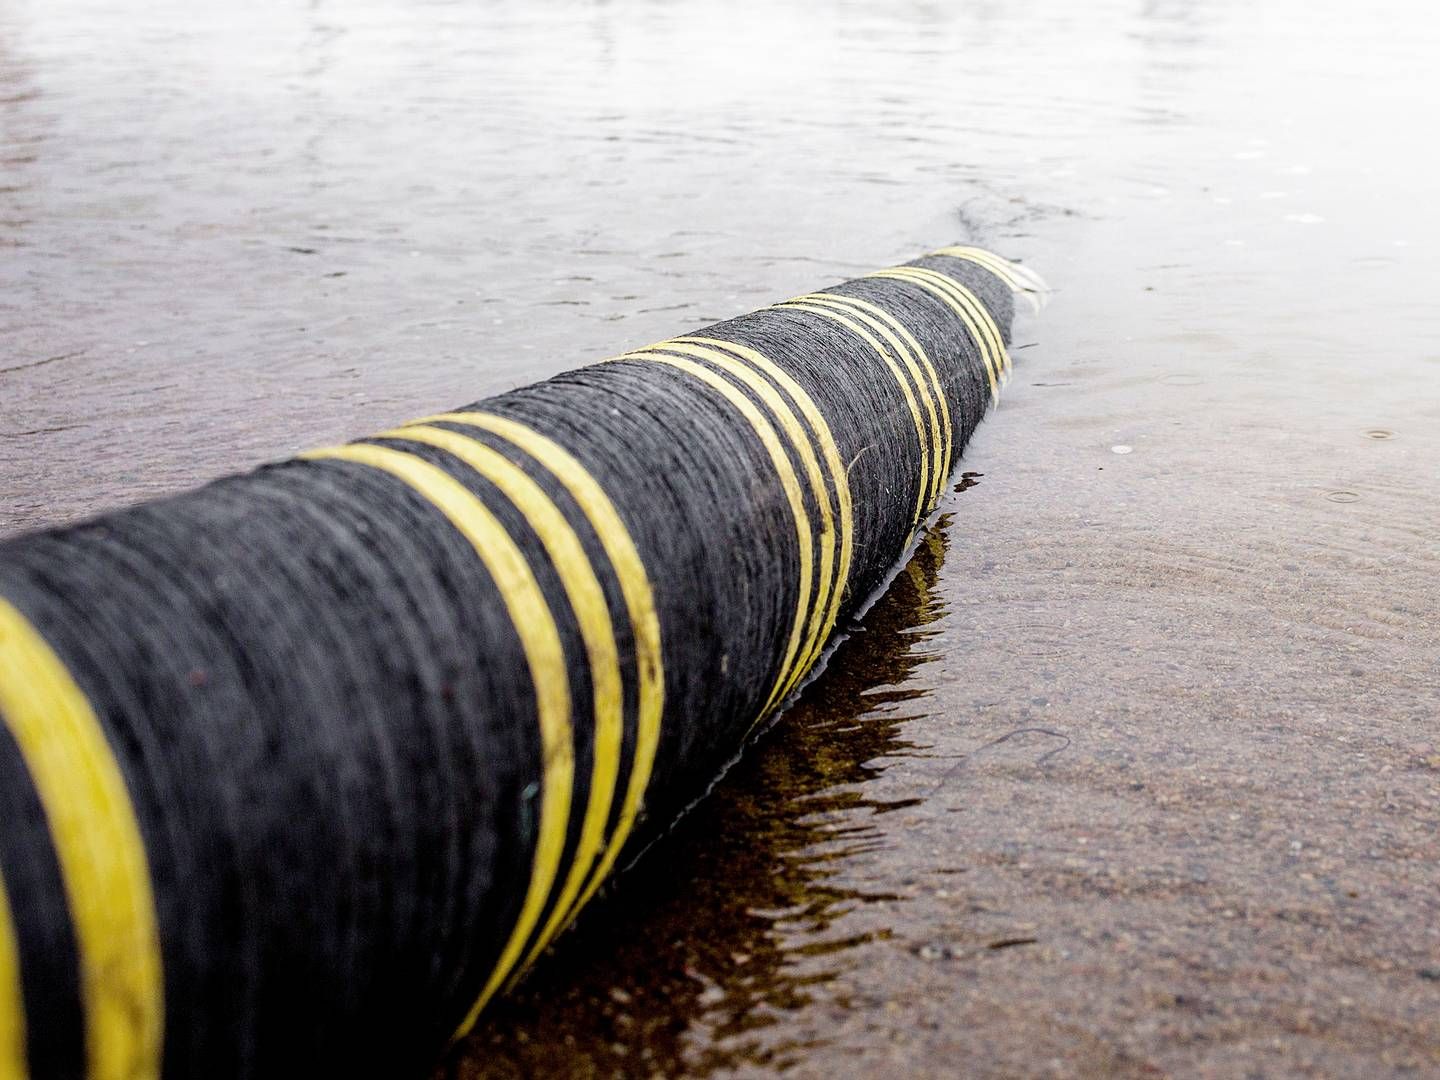 NKT expects to land a large order regarding high-voltage cables for offshore wind turbines in Poland. The picture shows cables in the waters near Karlskrona, Sweden. | Photo: Nkt